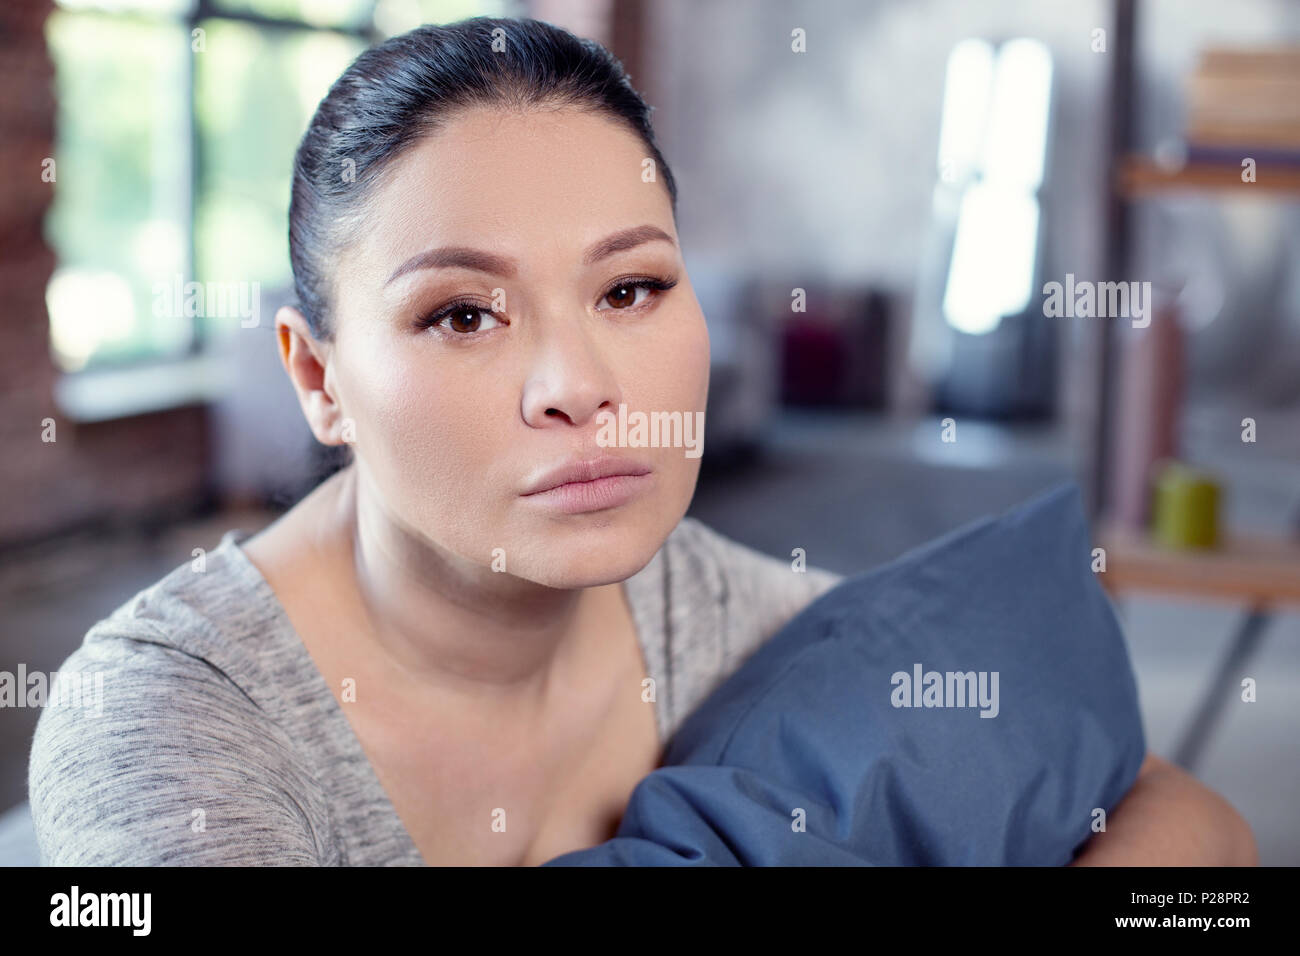 Fatigued upset woman confronting sleep disorder Stock Photo